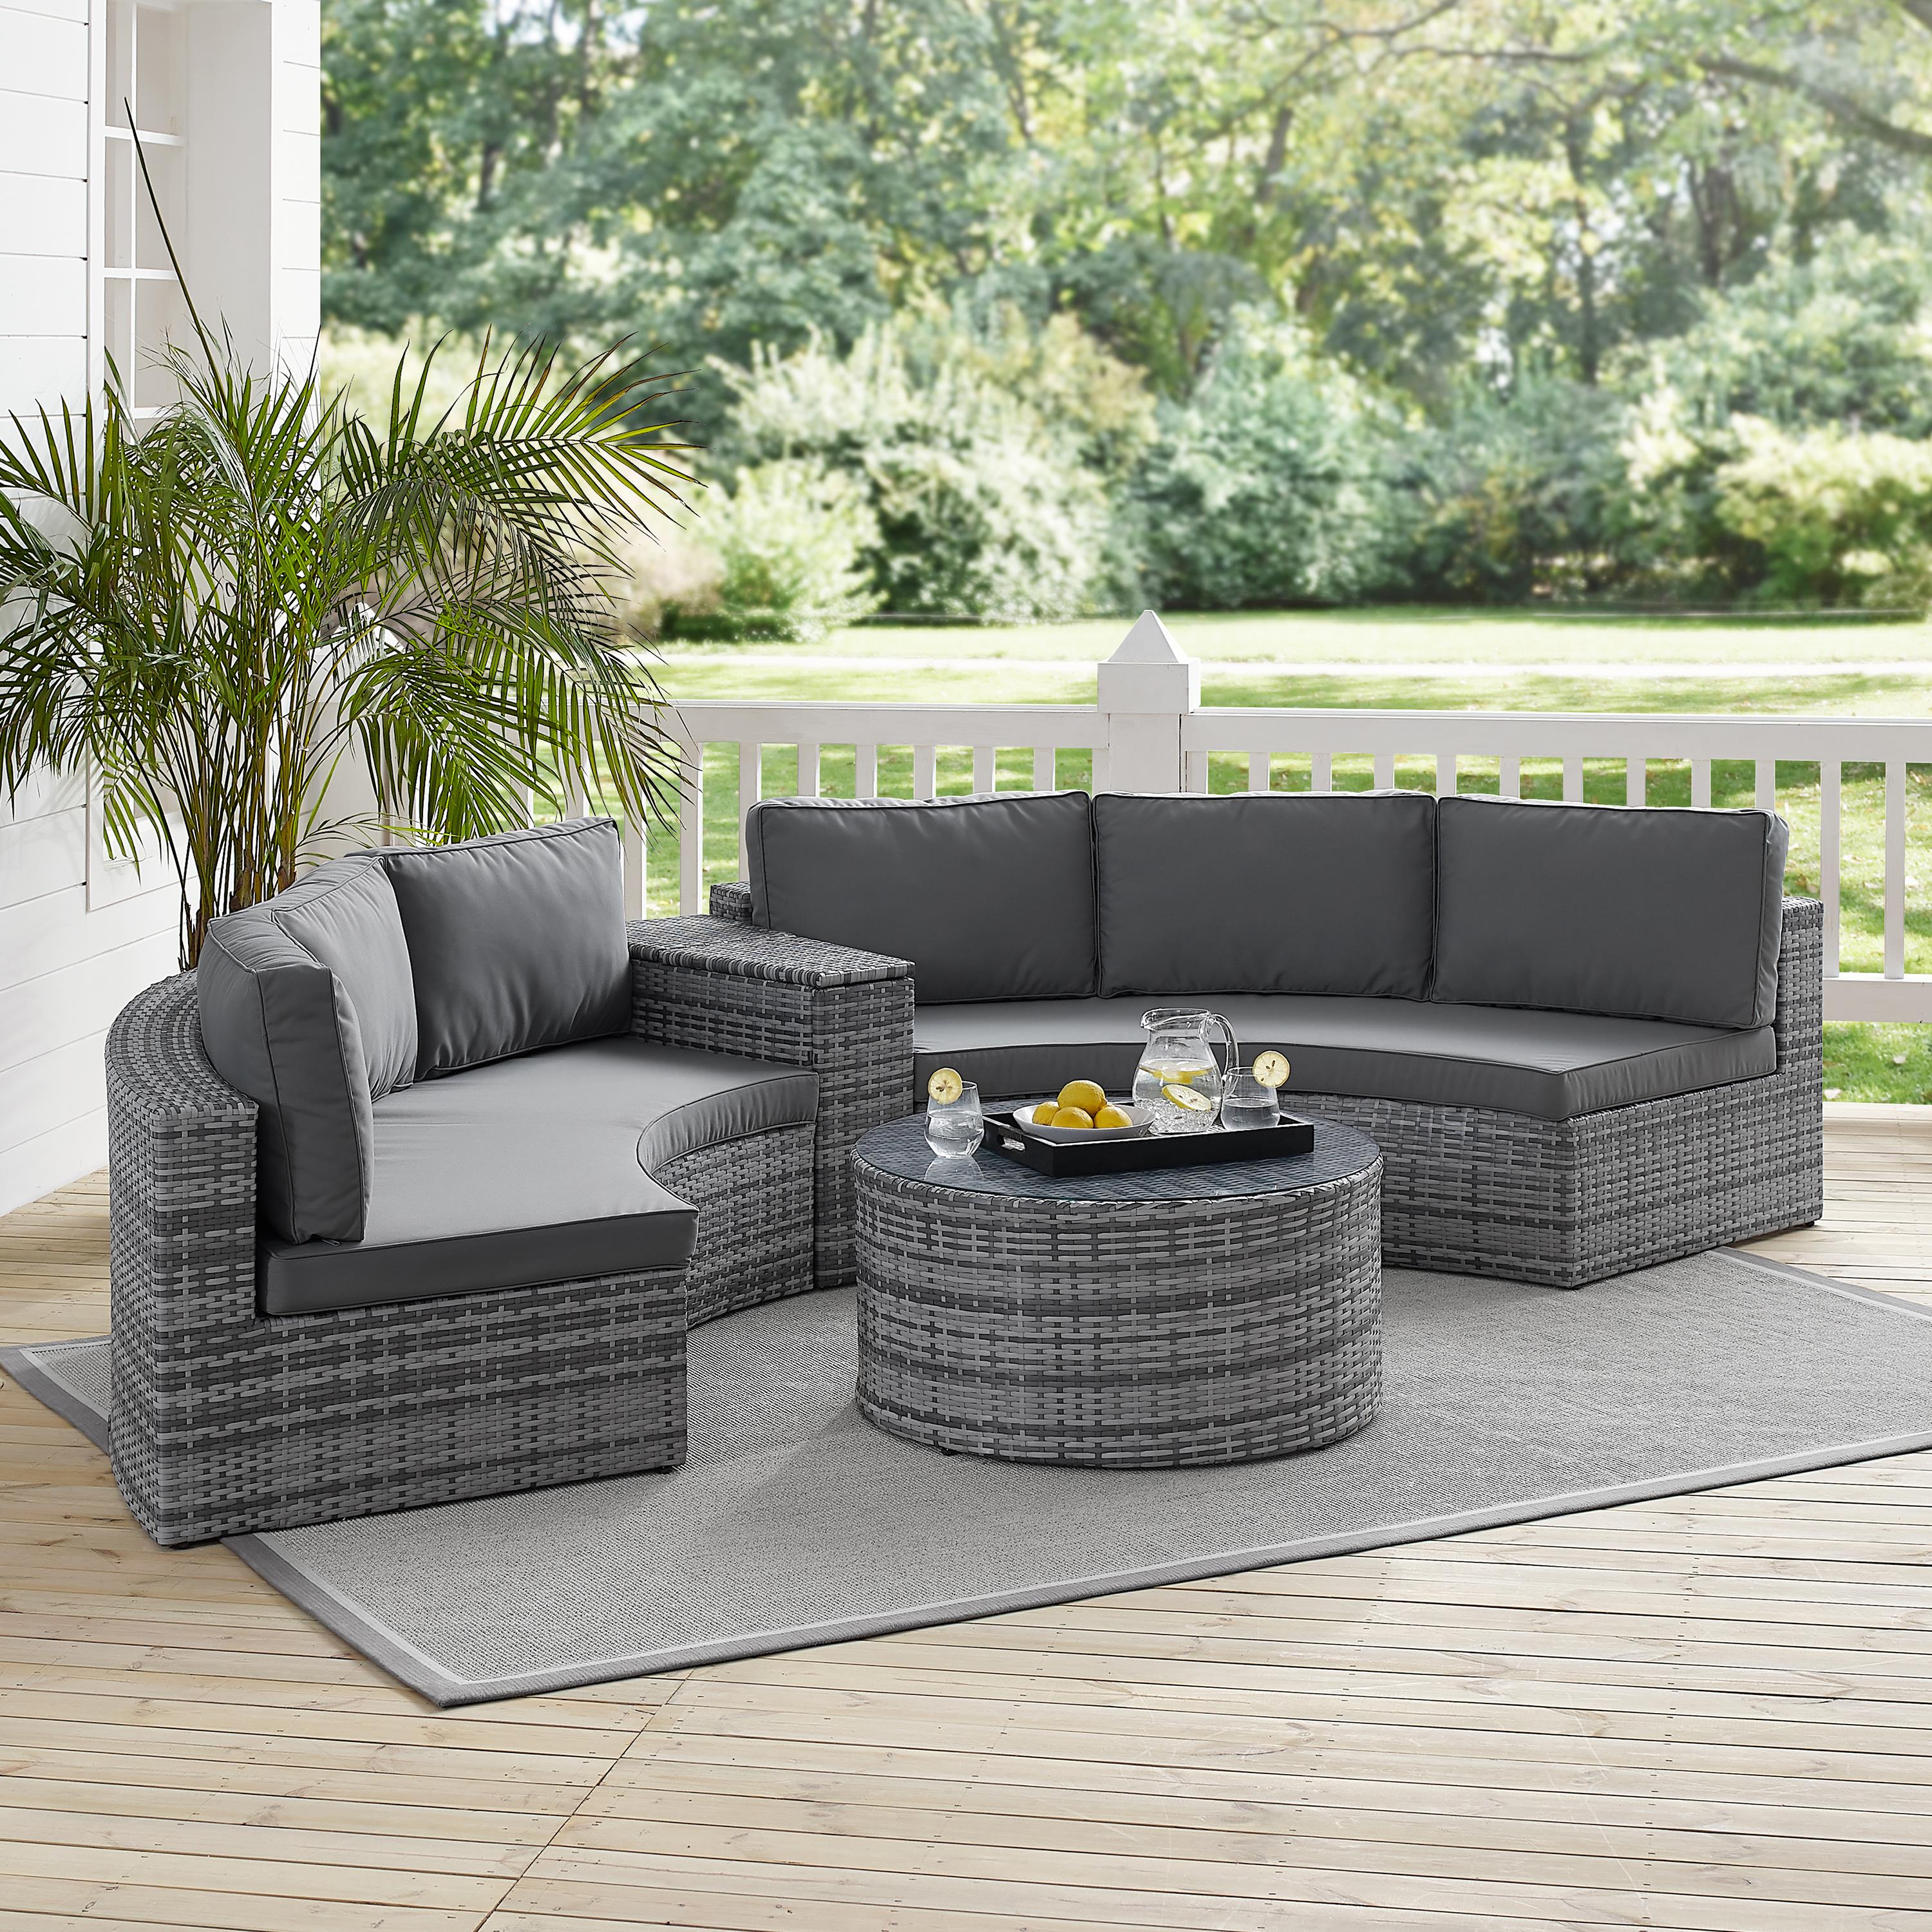 Crosley Catalina 4Pc Outdoor Wicker Sectional Set Gray/Gray - Arm Table, Round Glass Top Coffee Table, & 2 Round Sectional Sofas - image 5 of 9